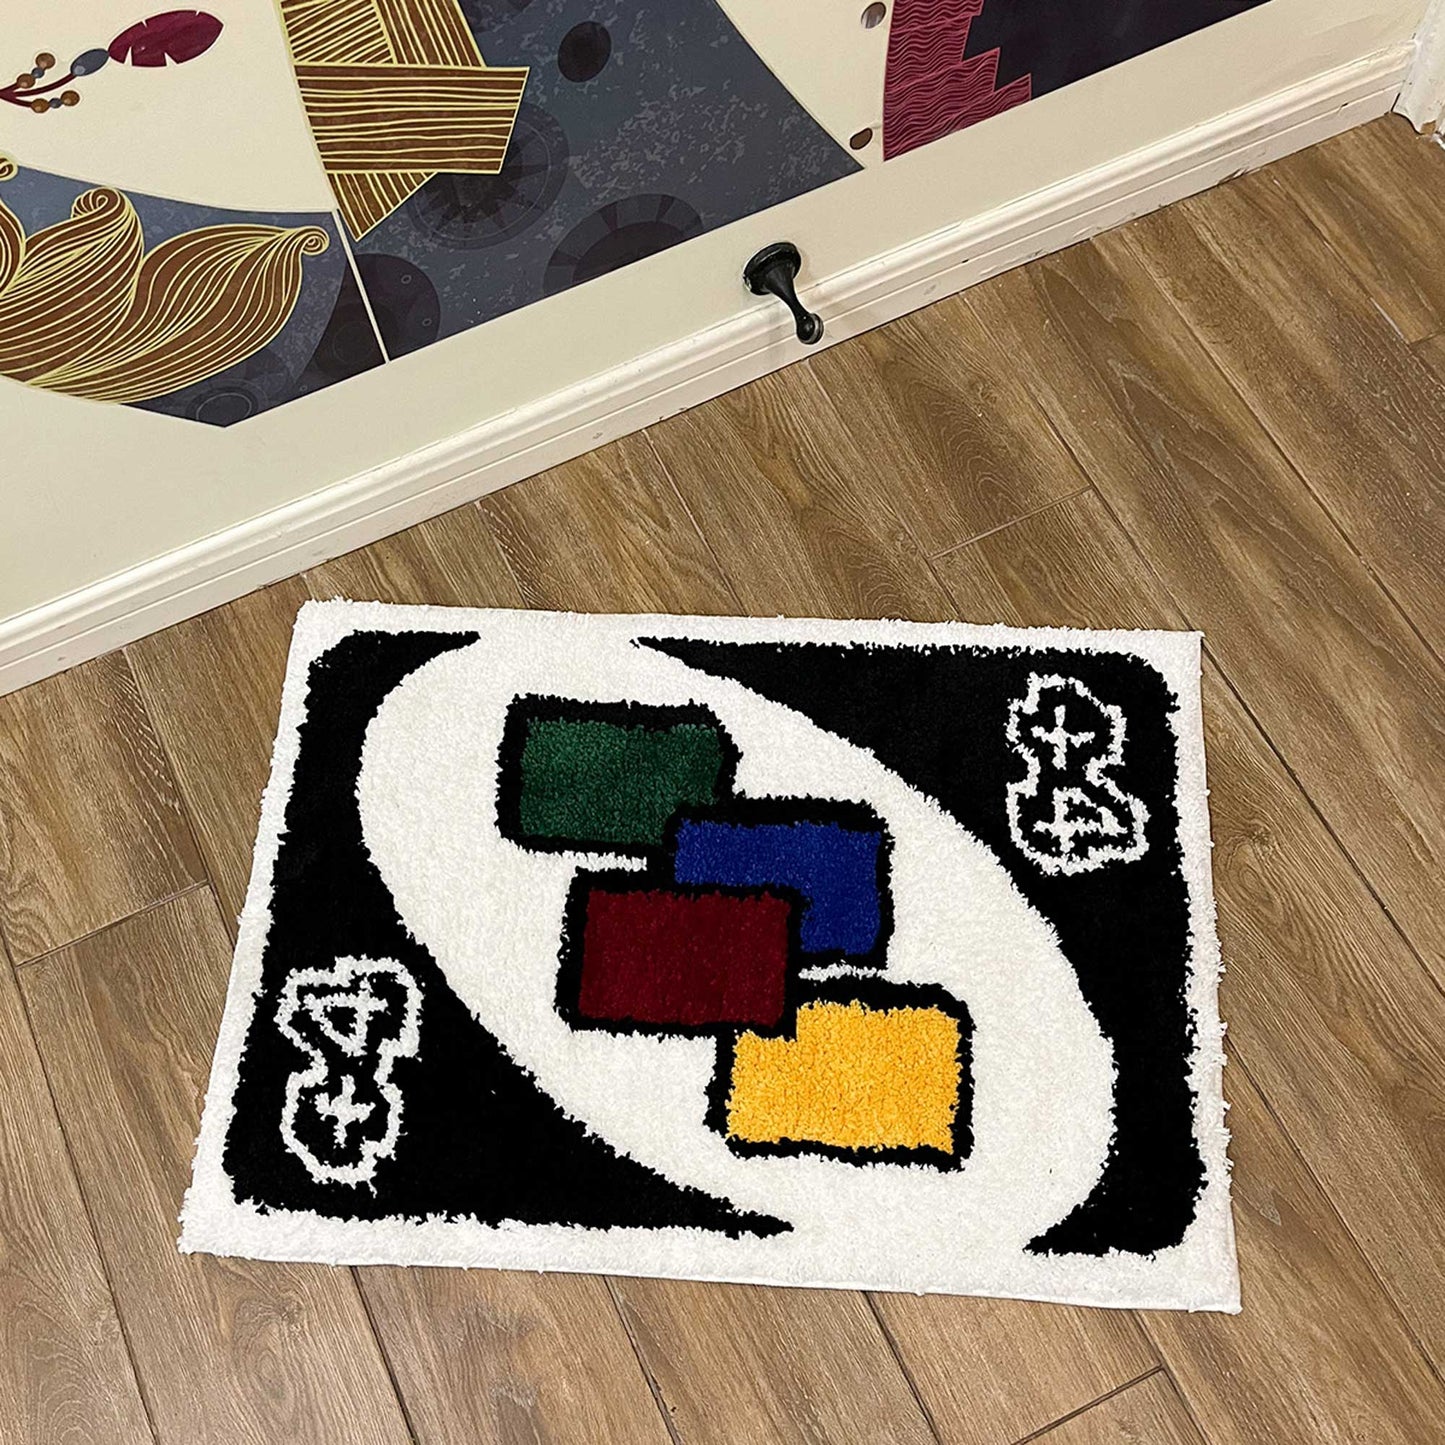 Tufted Rug +4 UNO Card Rug Front in Bedroom